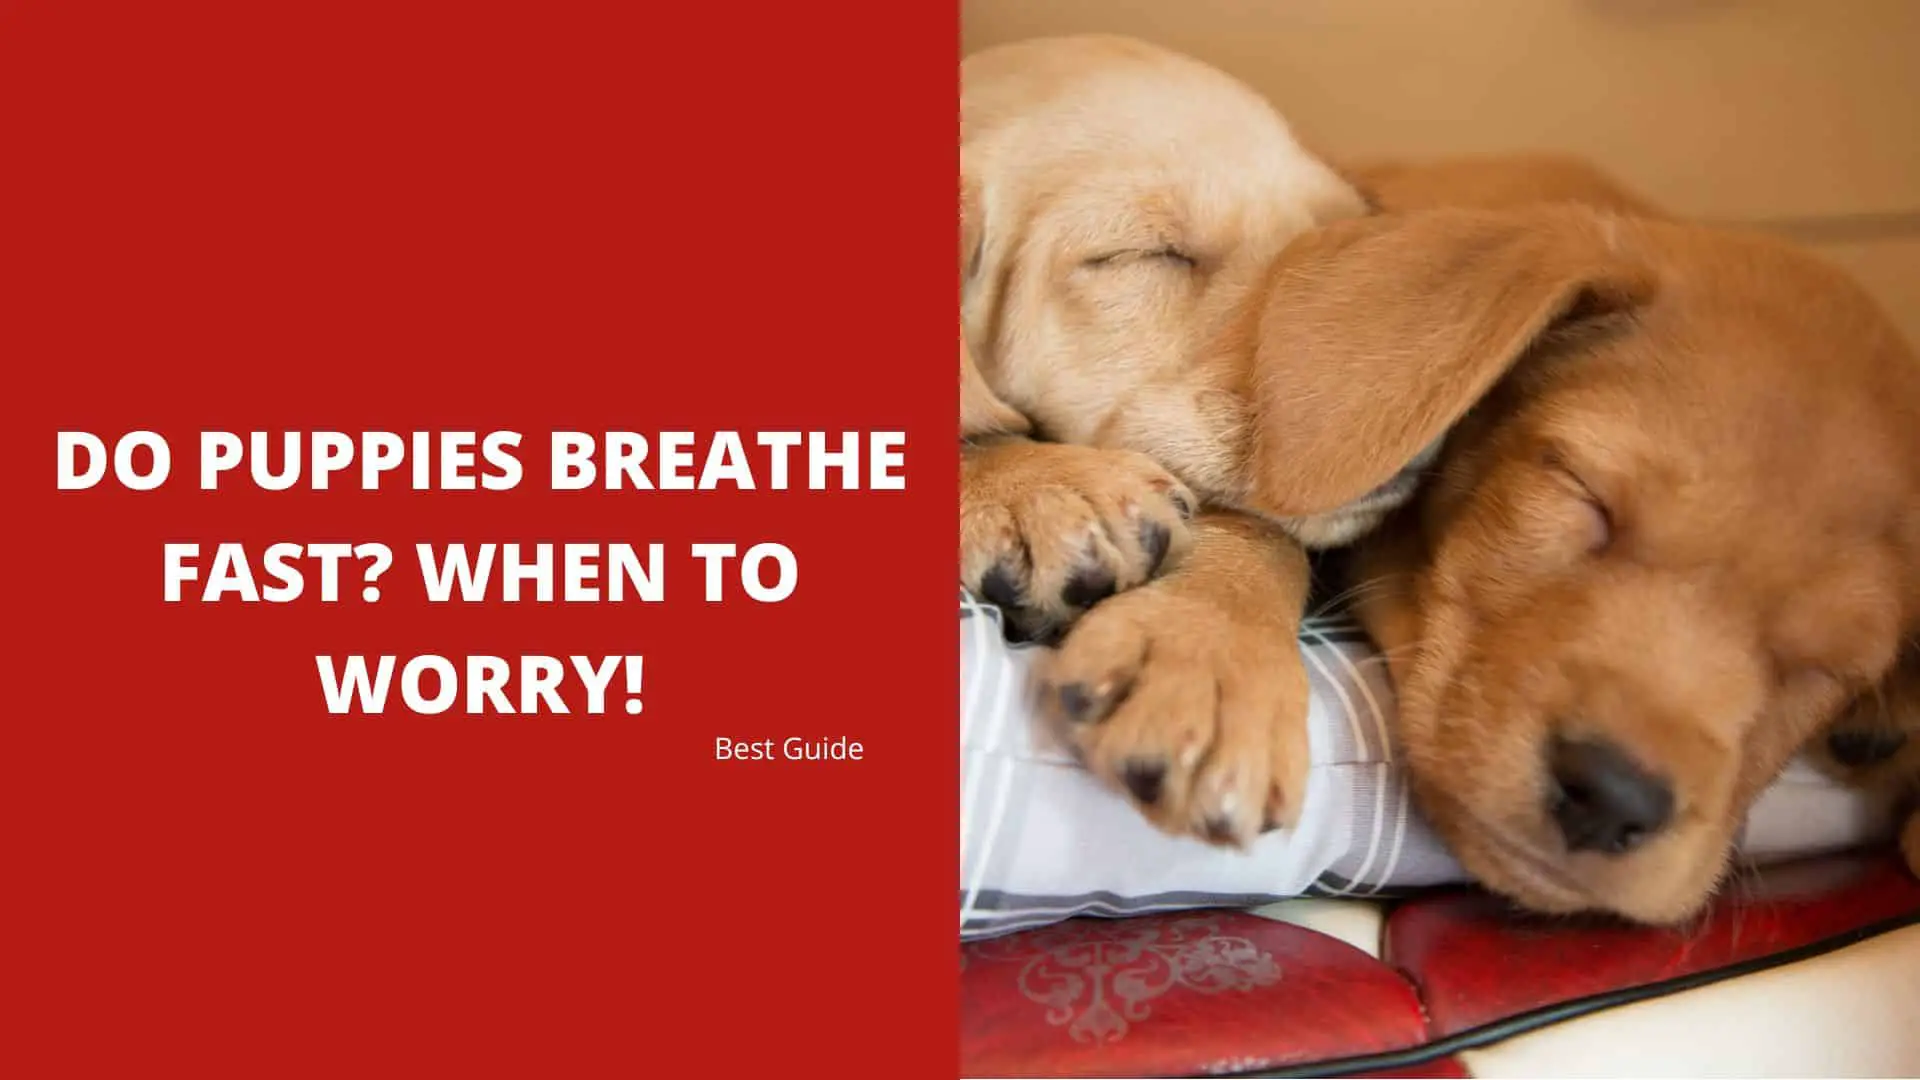 Do Puppies Breathe Fast? When To Worry! Best Guide